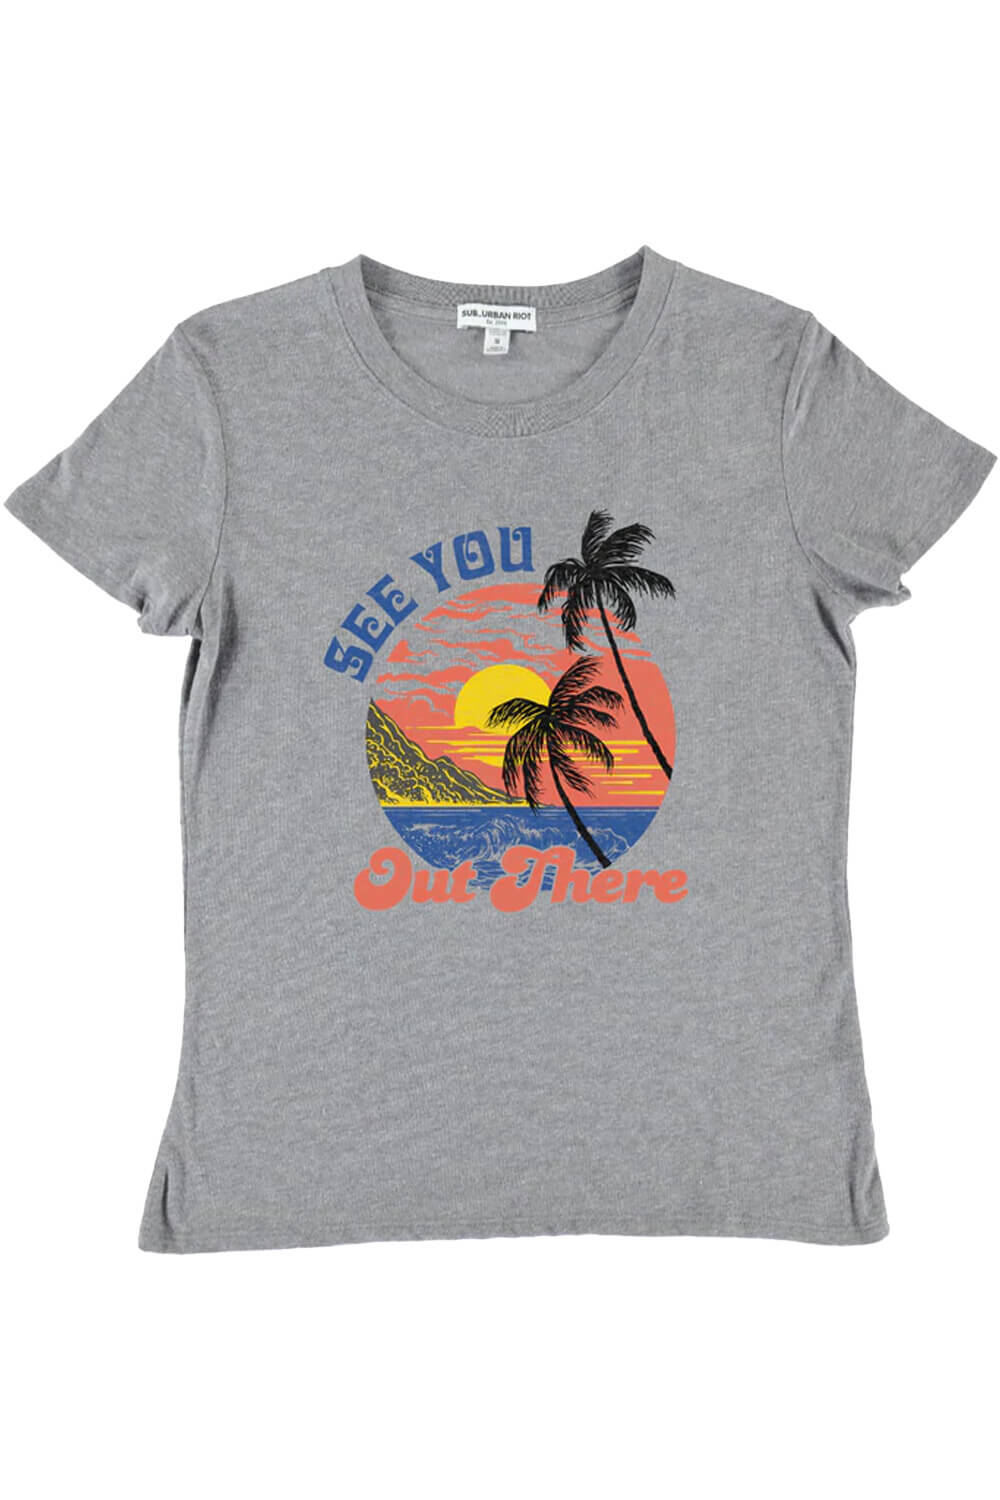 SEE YOU OUT THERE YOUTH SIZE LOOSE TEE